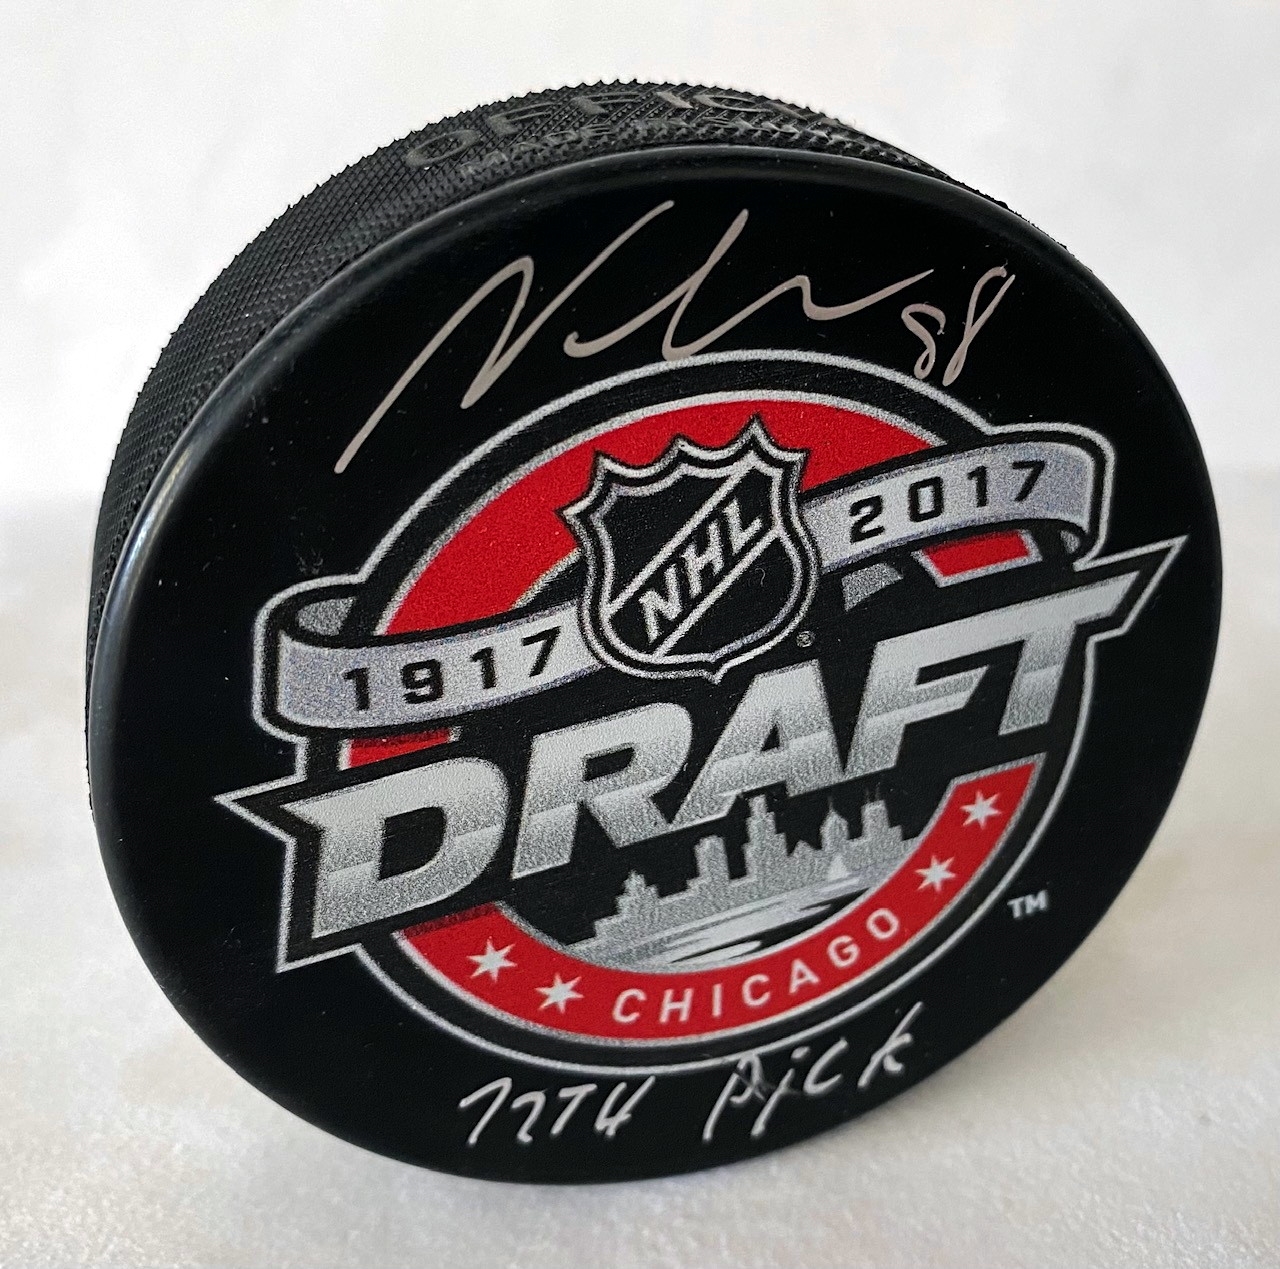 Martin Necas Signed 2014 NHL Entry Draft Puck with 12th Pick Note (Flawed)